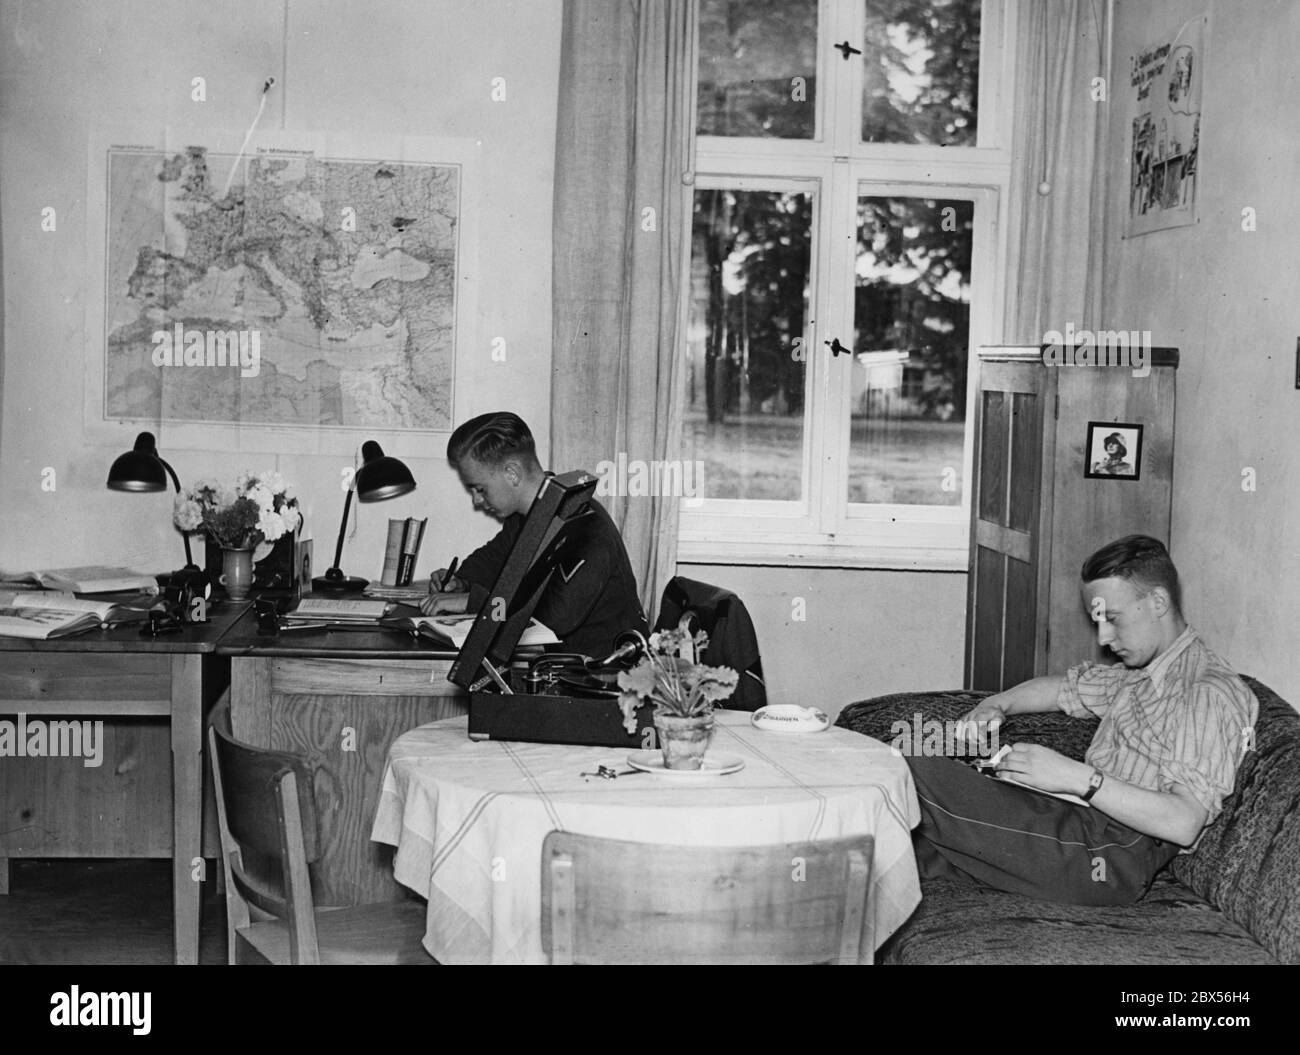 Fahnenjunker in their rooms (single and double rooms) at the Military Medical Academy in Berlin. On the wall there is a map of Europe. Stock Photo